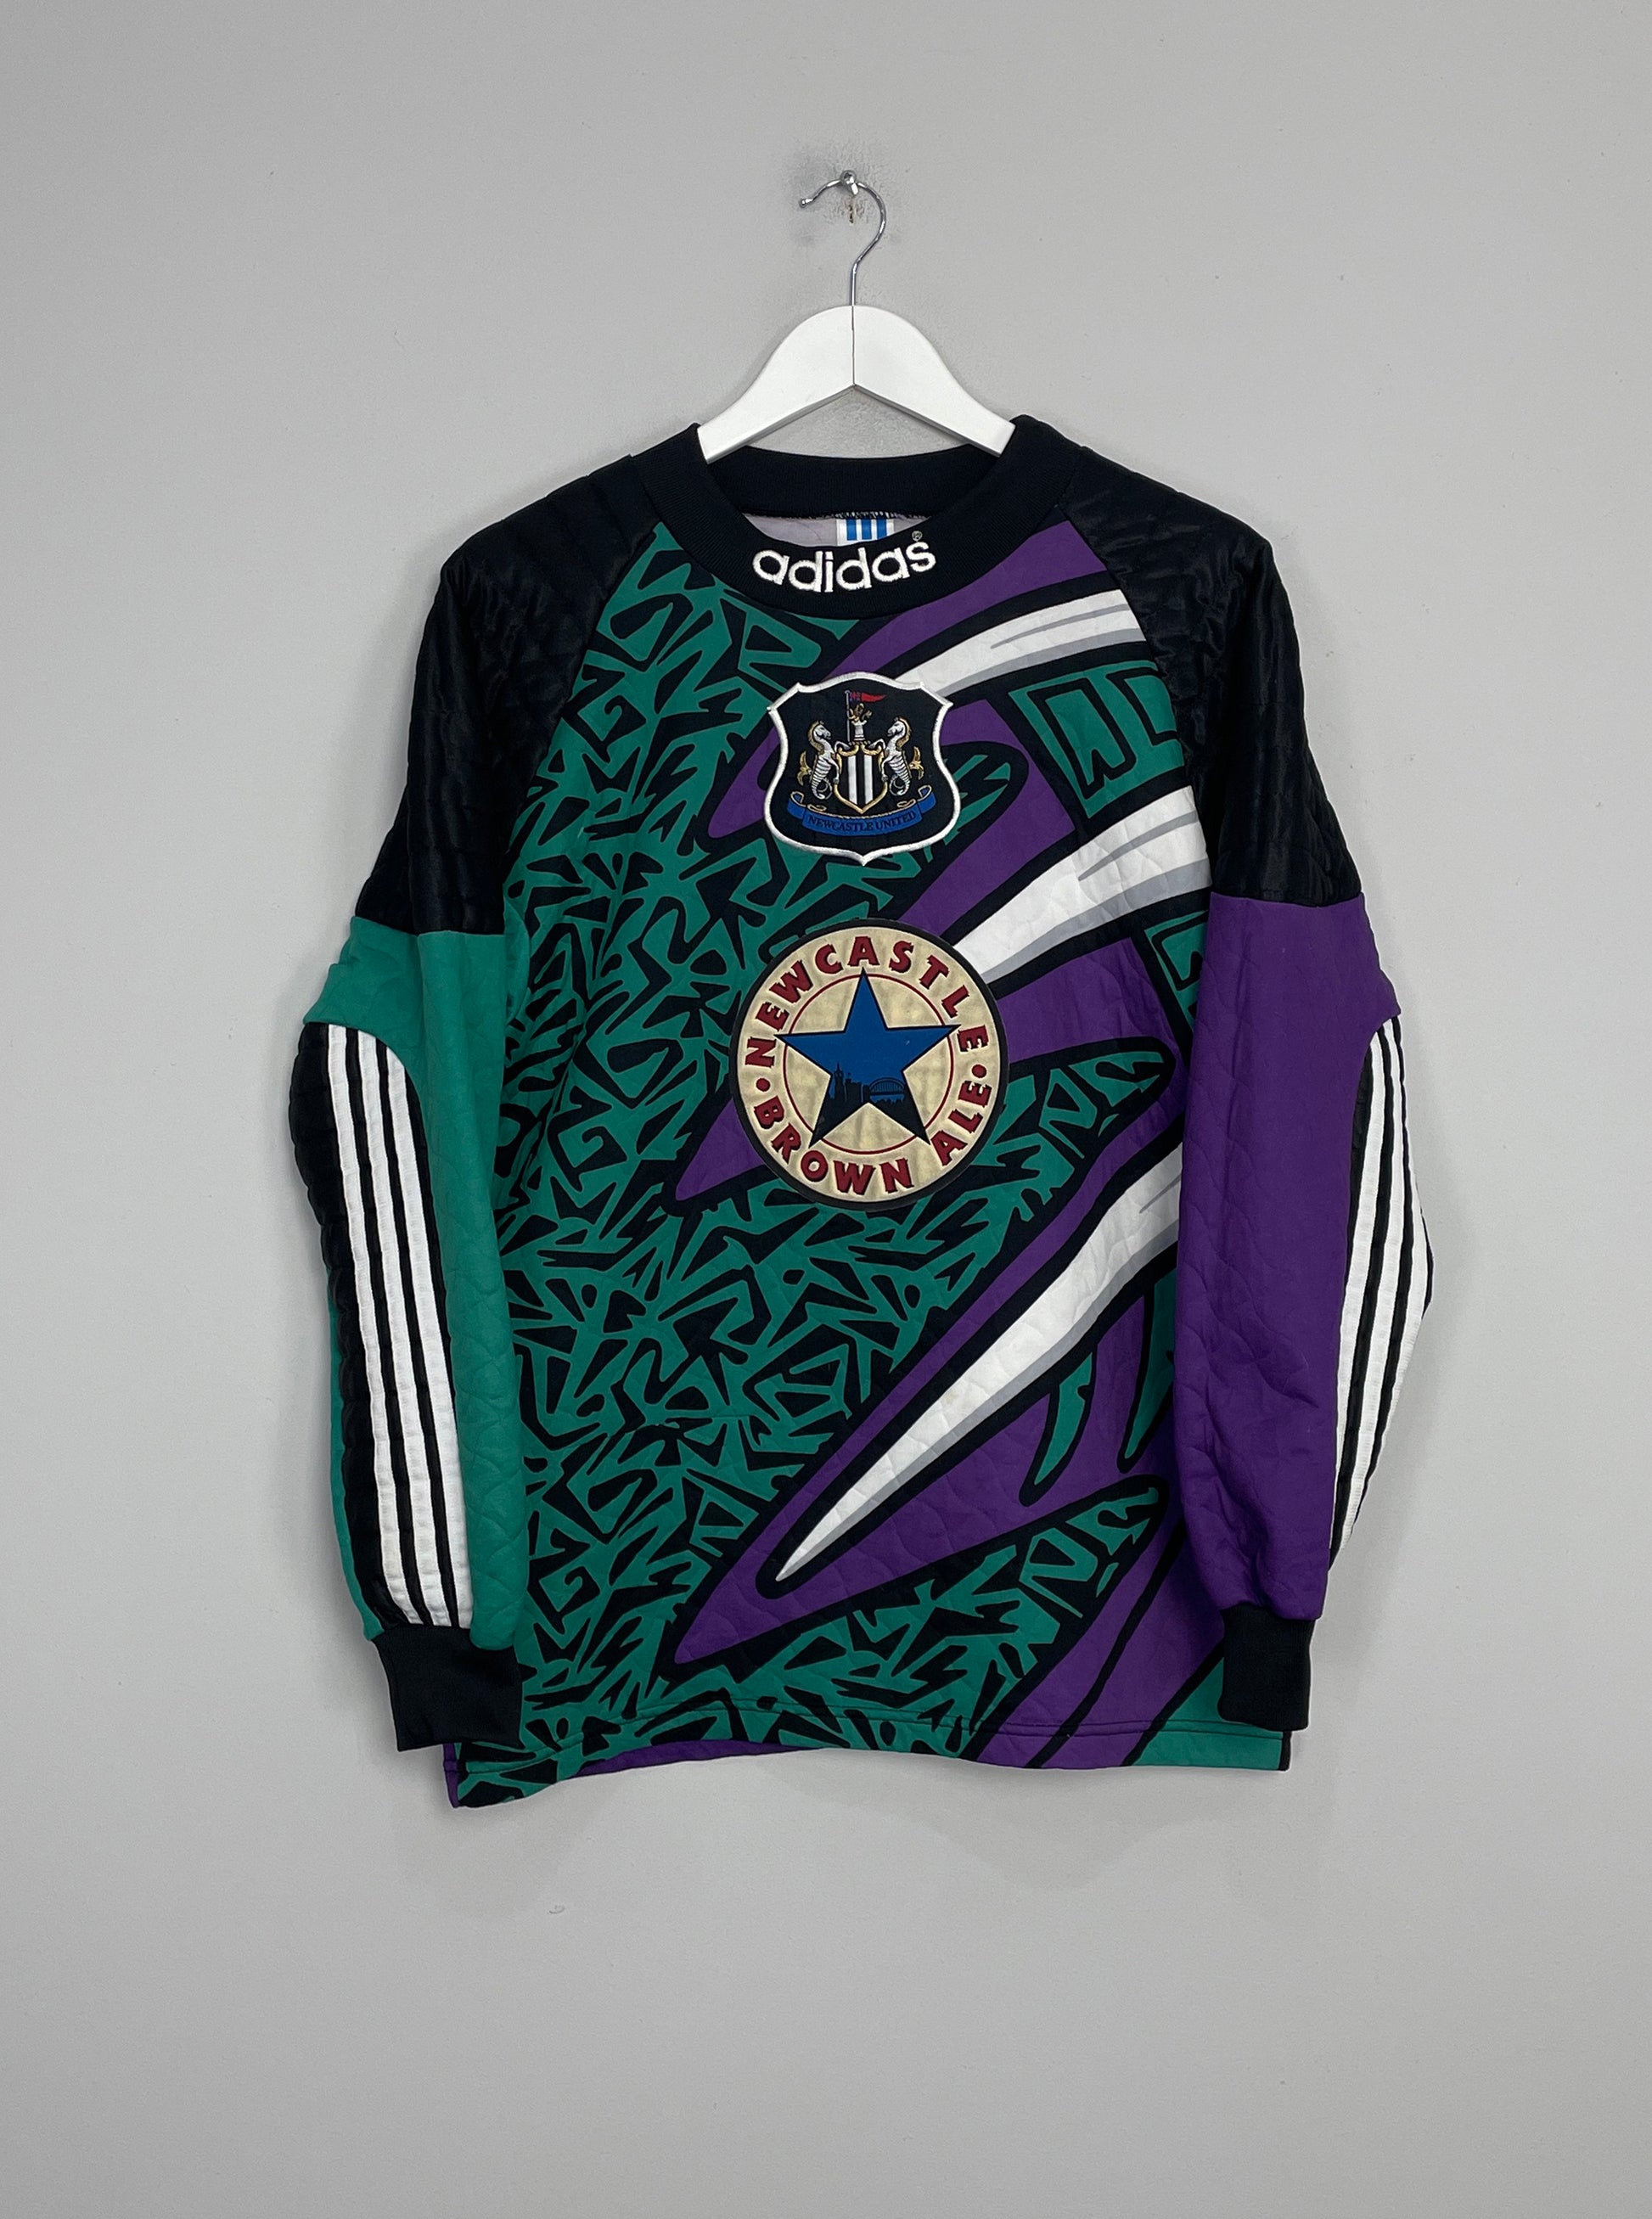 Image of the Newcastle shirt from the 1995/96 season